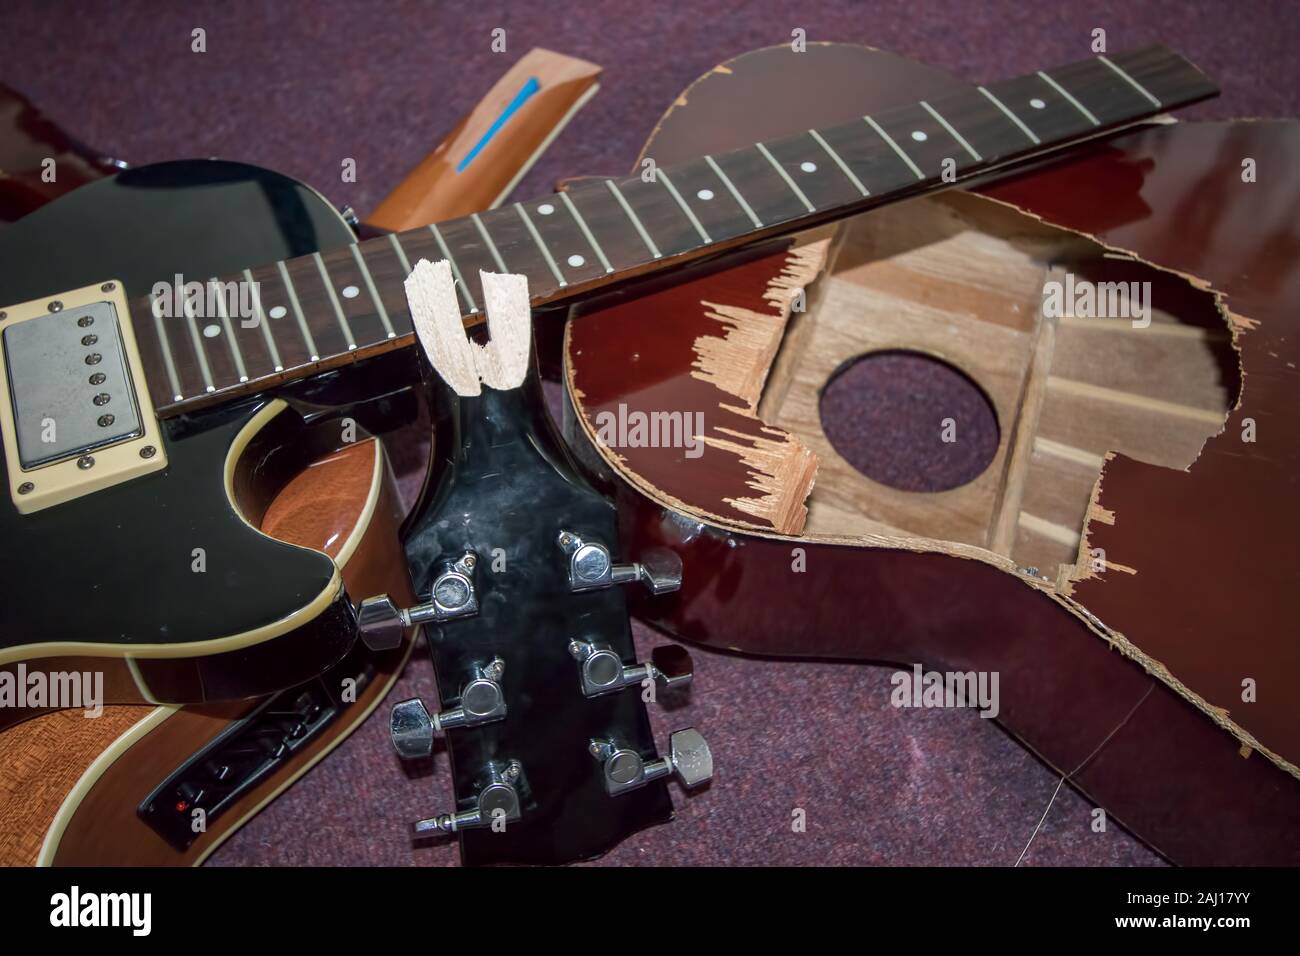 Broken guitars. Pile of smashed electric and acoustic guitar pieces. Frustrated guitarist smashed instrument parts ready for burning or repair. Stock Photo